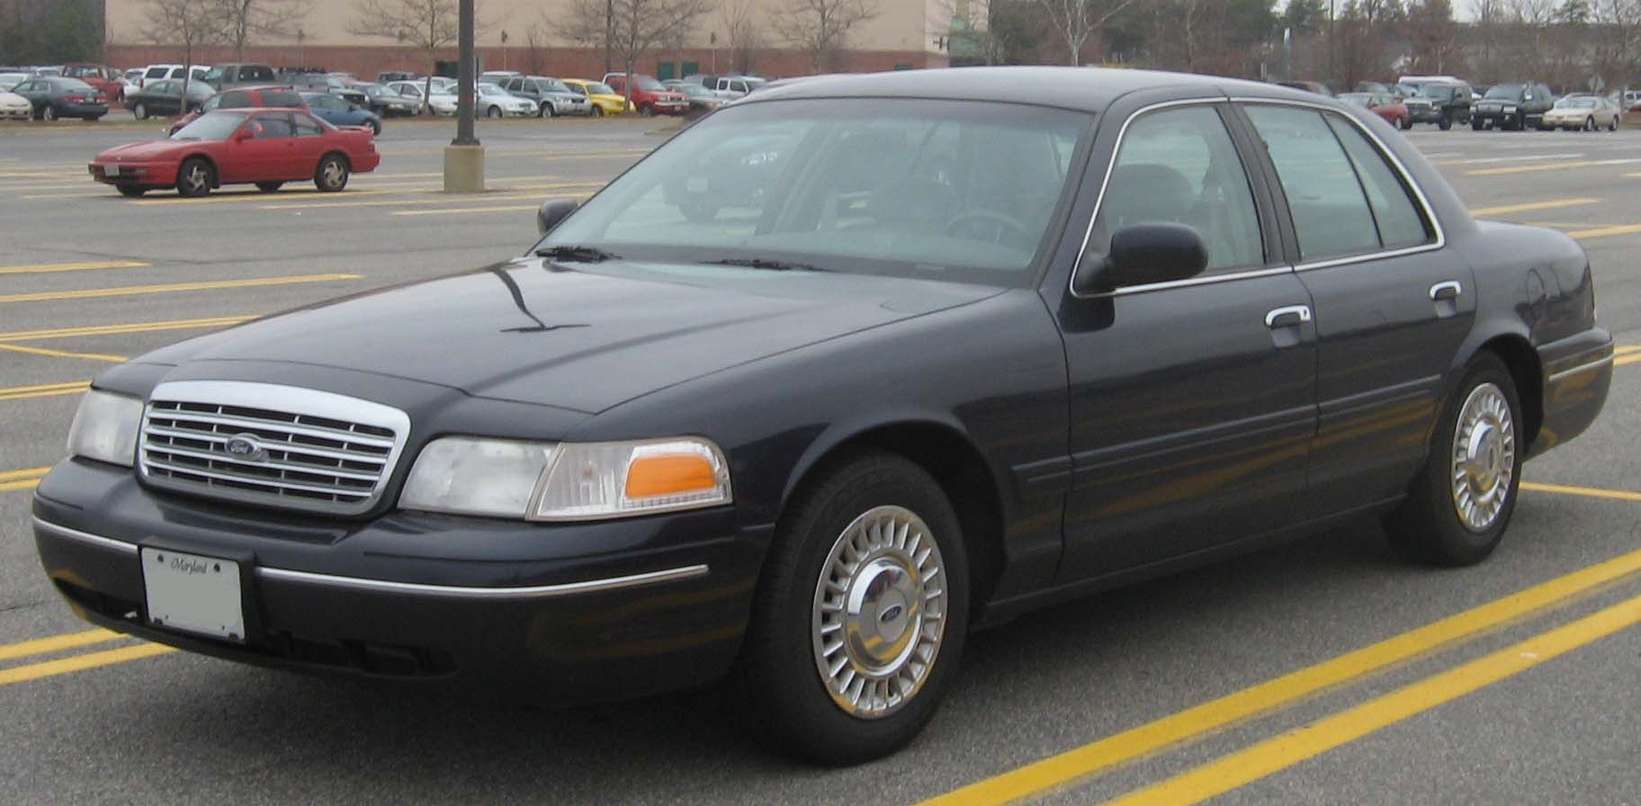 Ford Crown Victoria #8630691